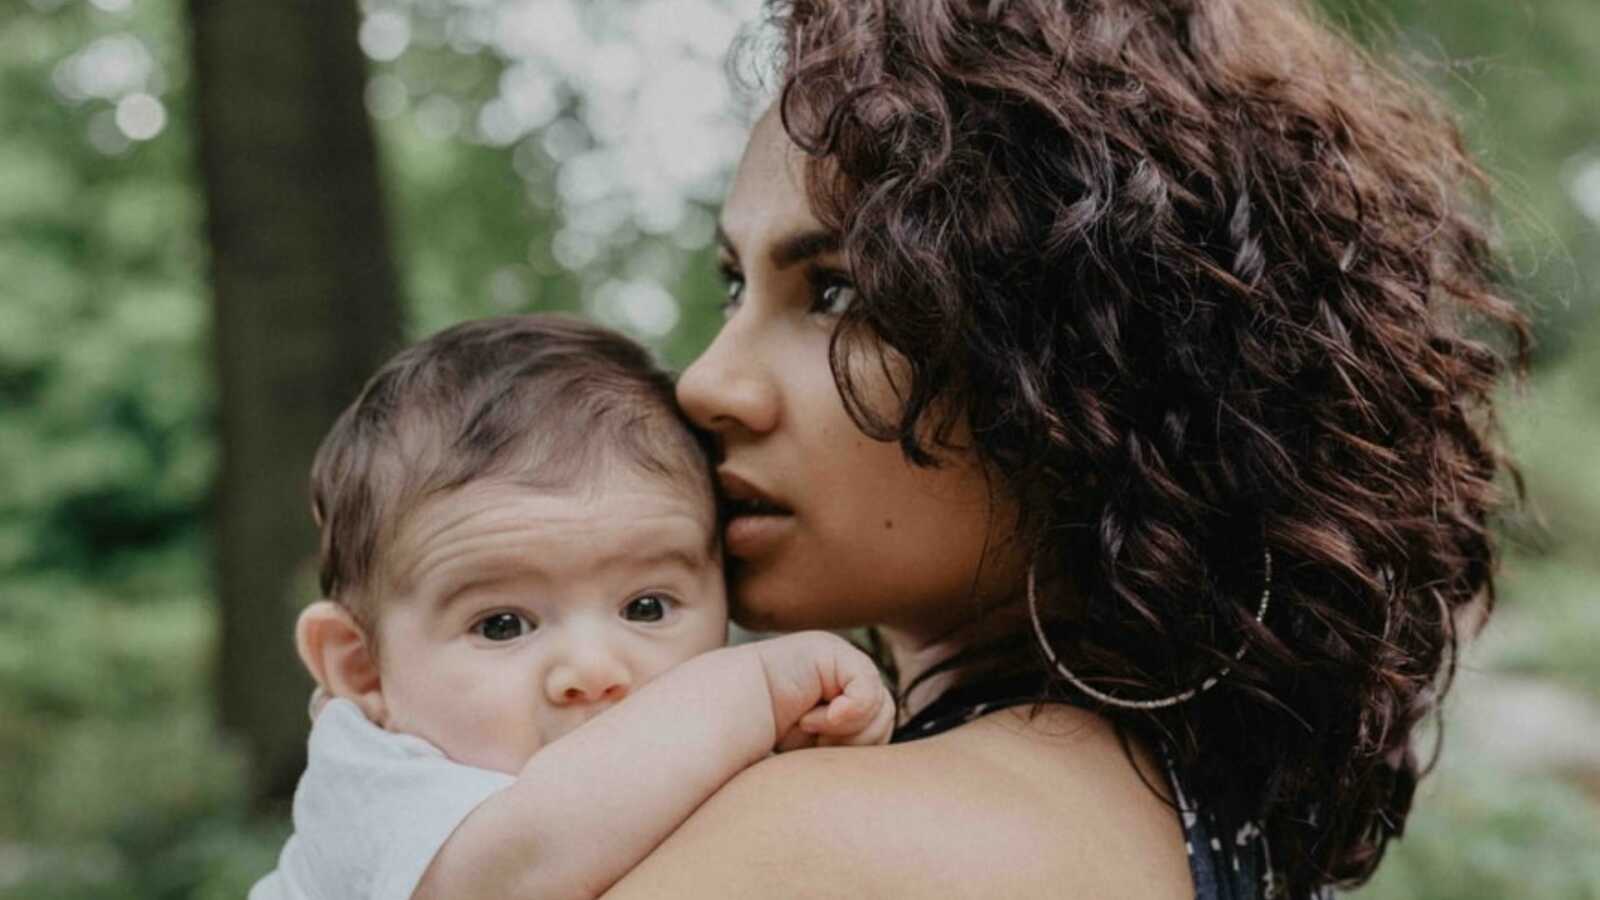 Mom looks off camera while holding her young child